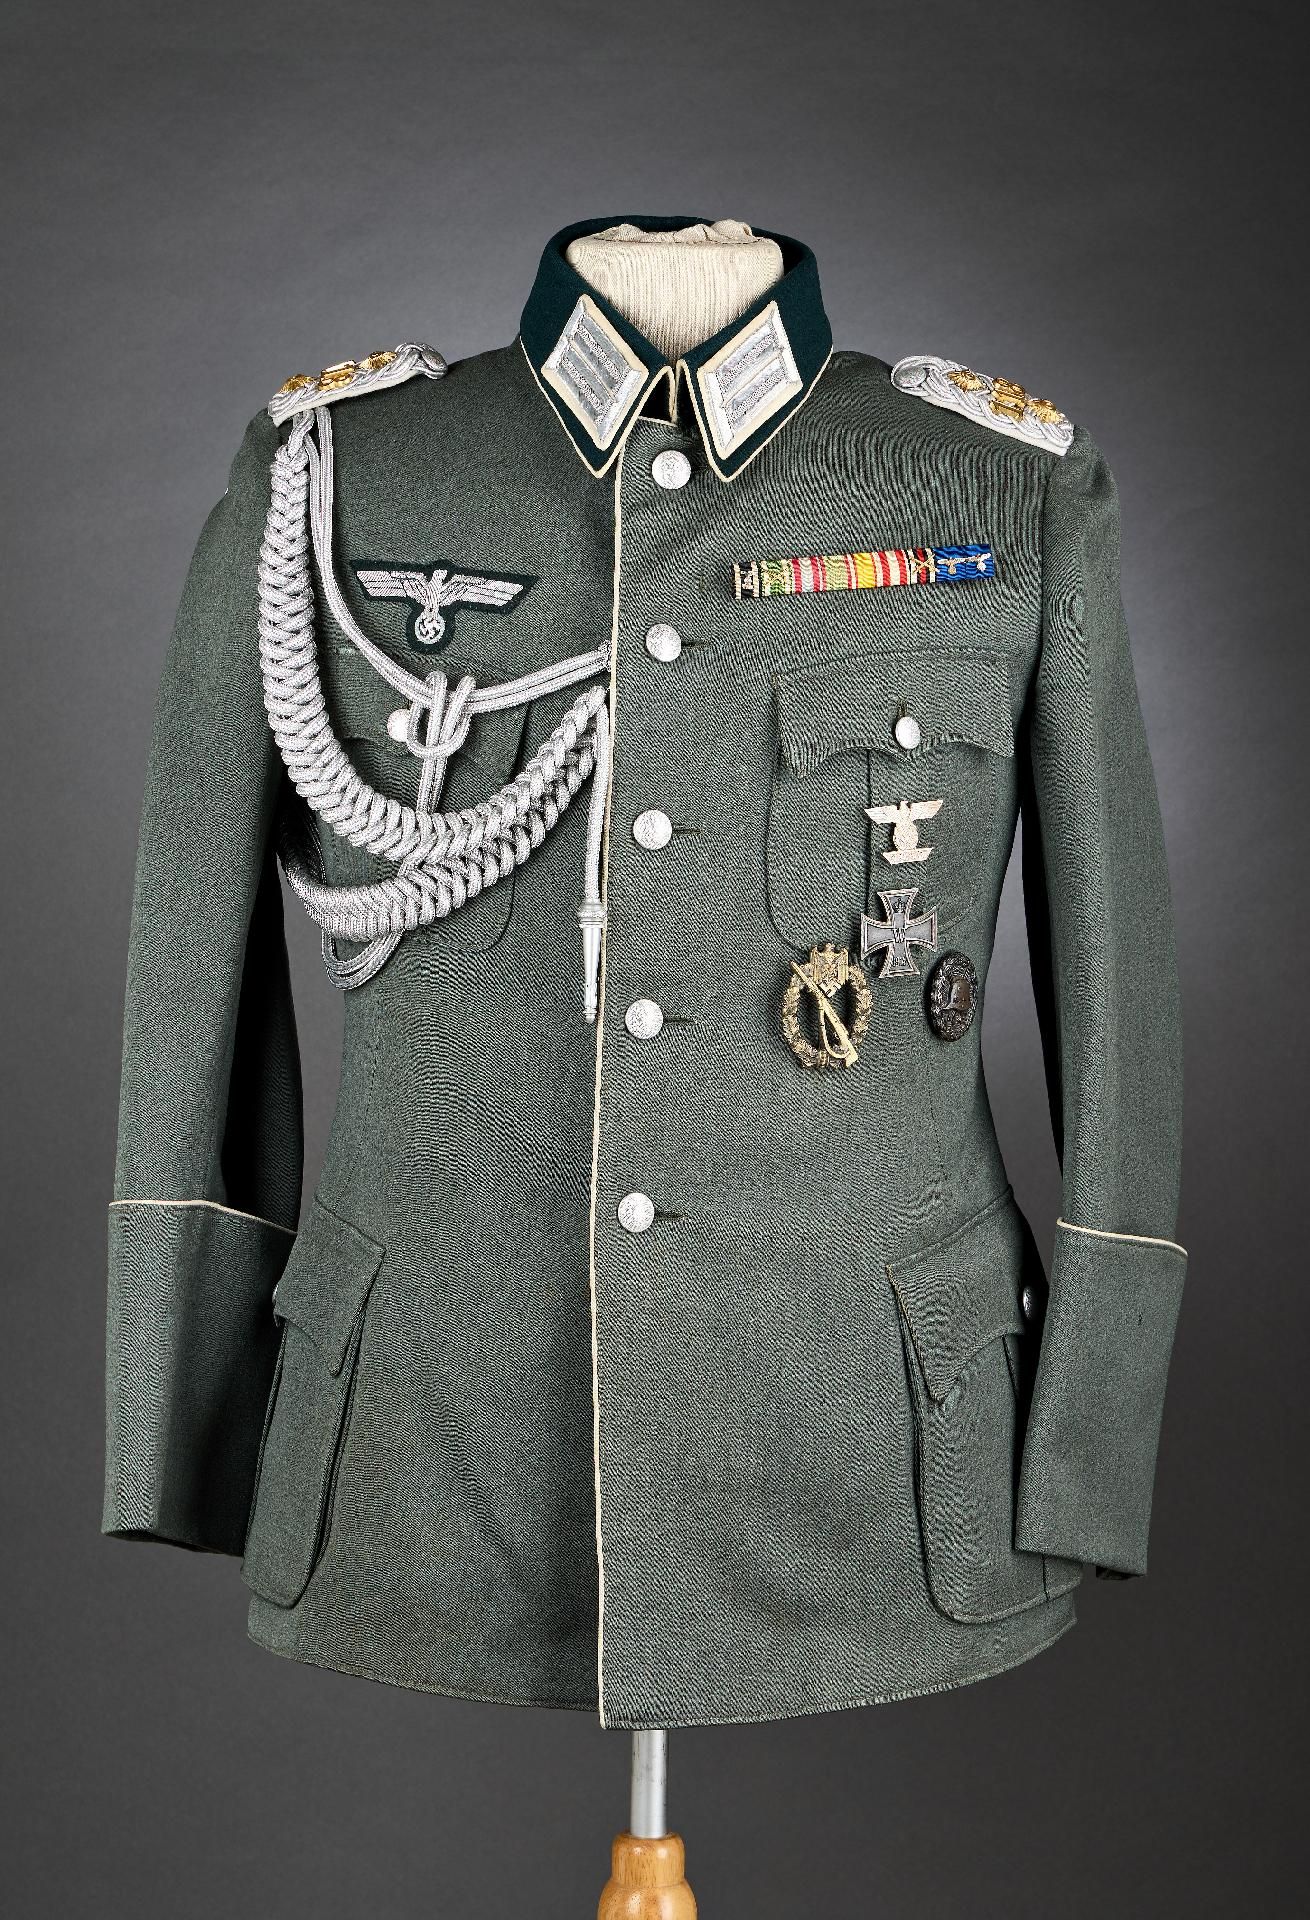 Infanterie : Tunic of an Infantry Regiment 118 Colonel.